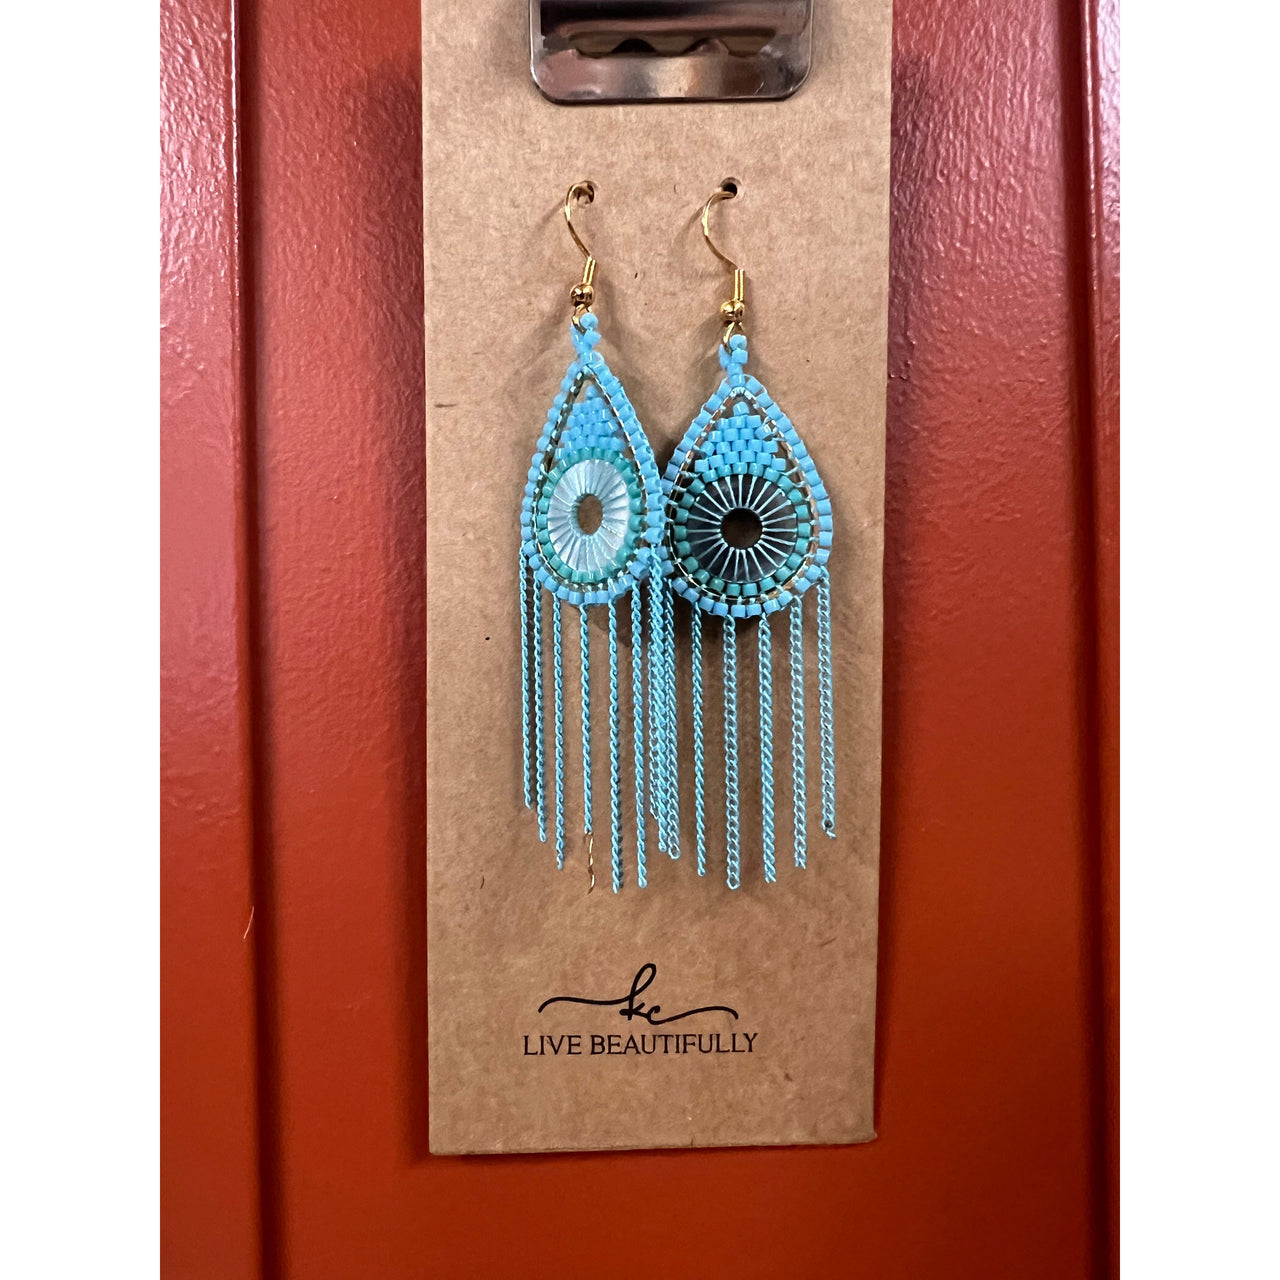 Live Beautifully Earrings - Woven Beaded Turquoise